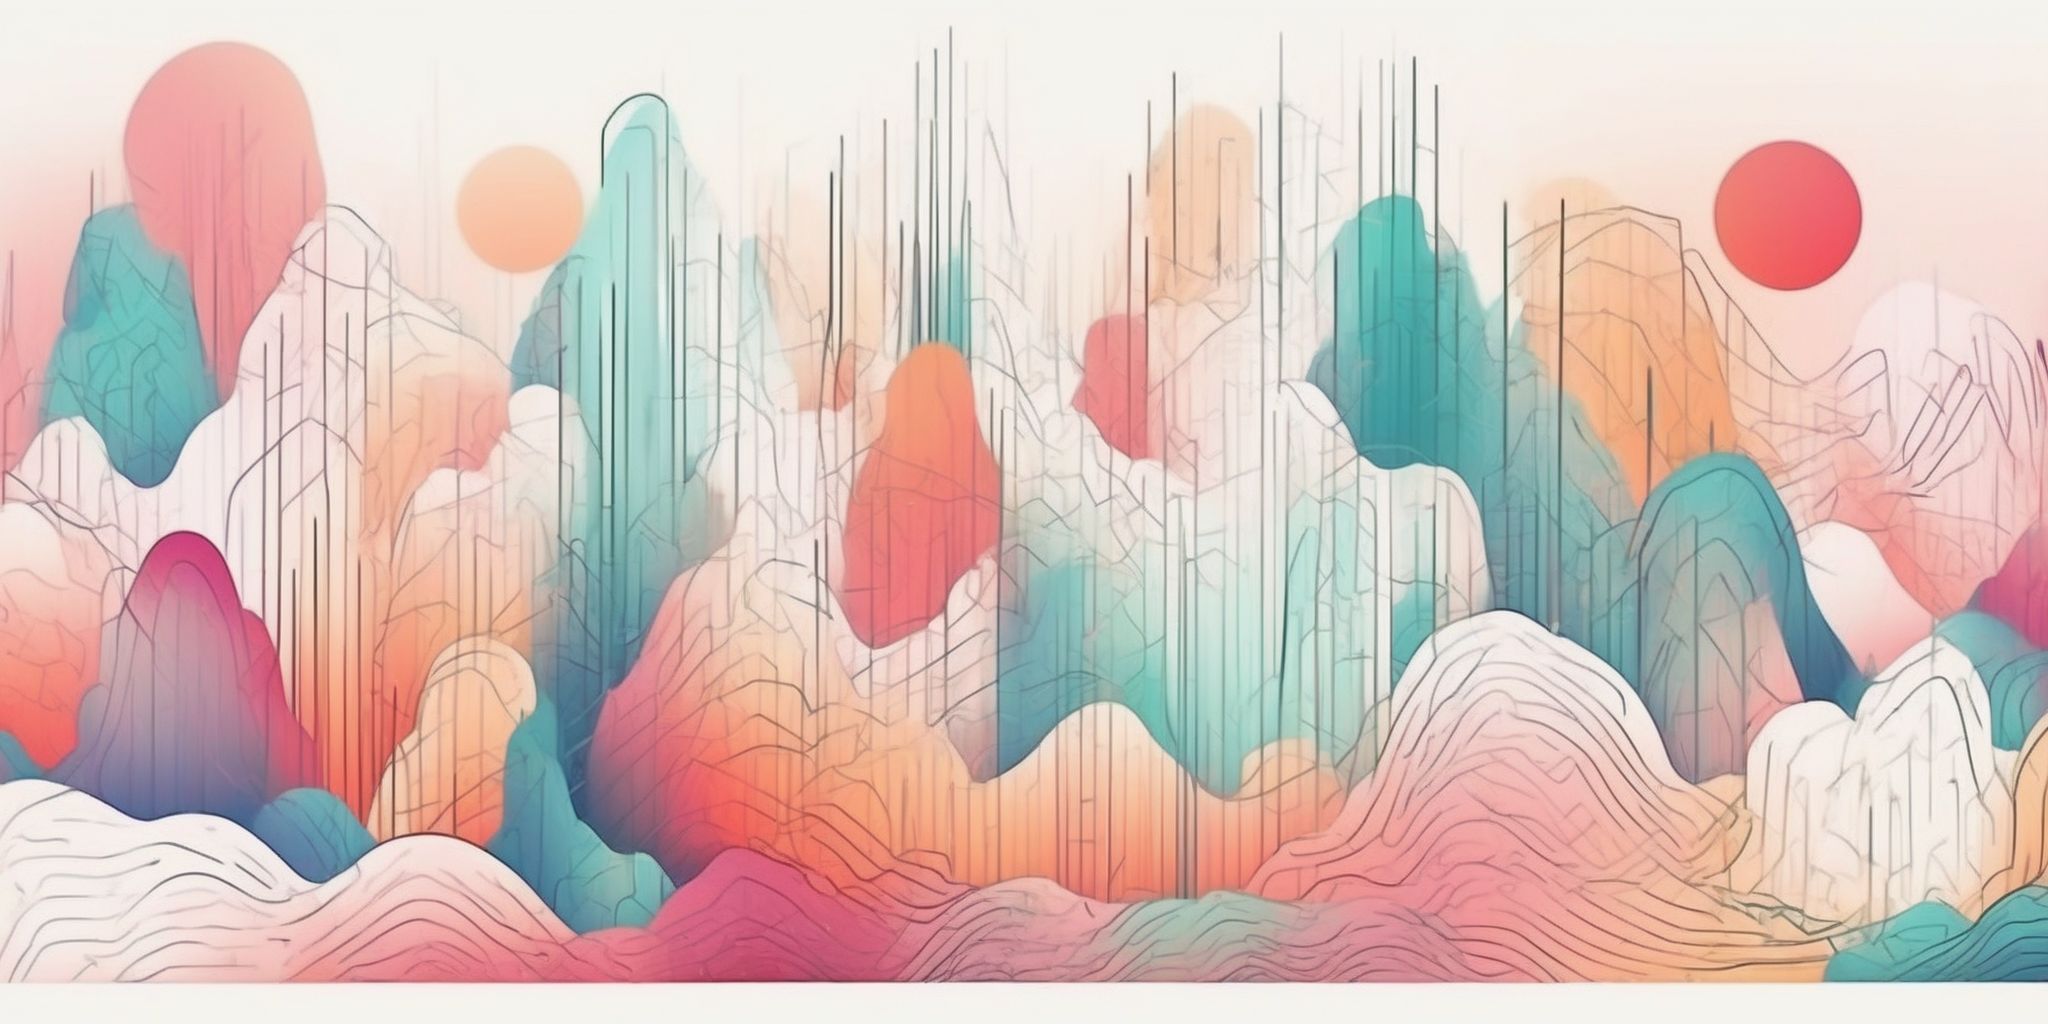 filter in illustration style with gradients and white background